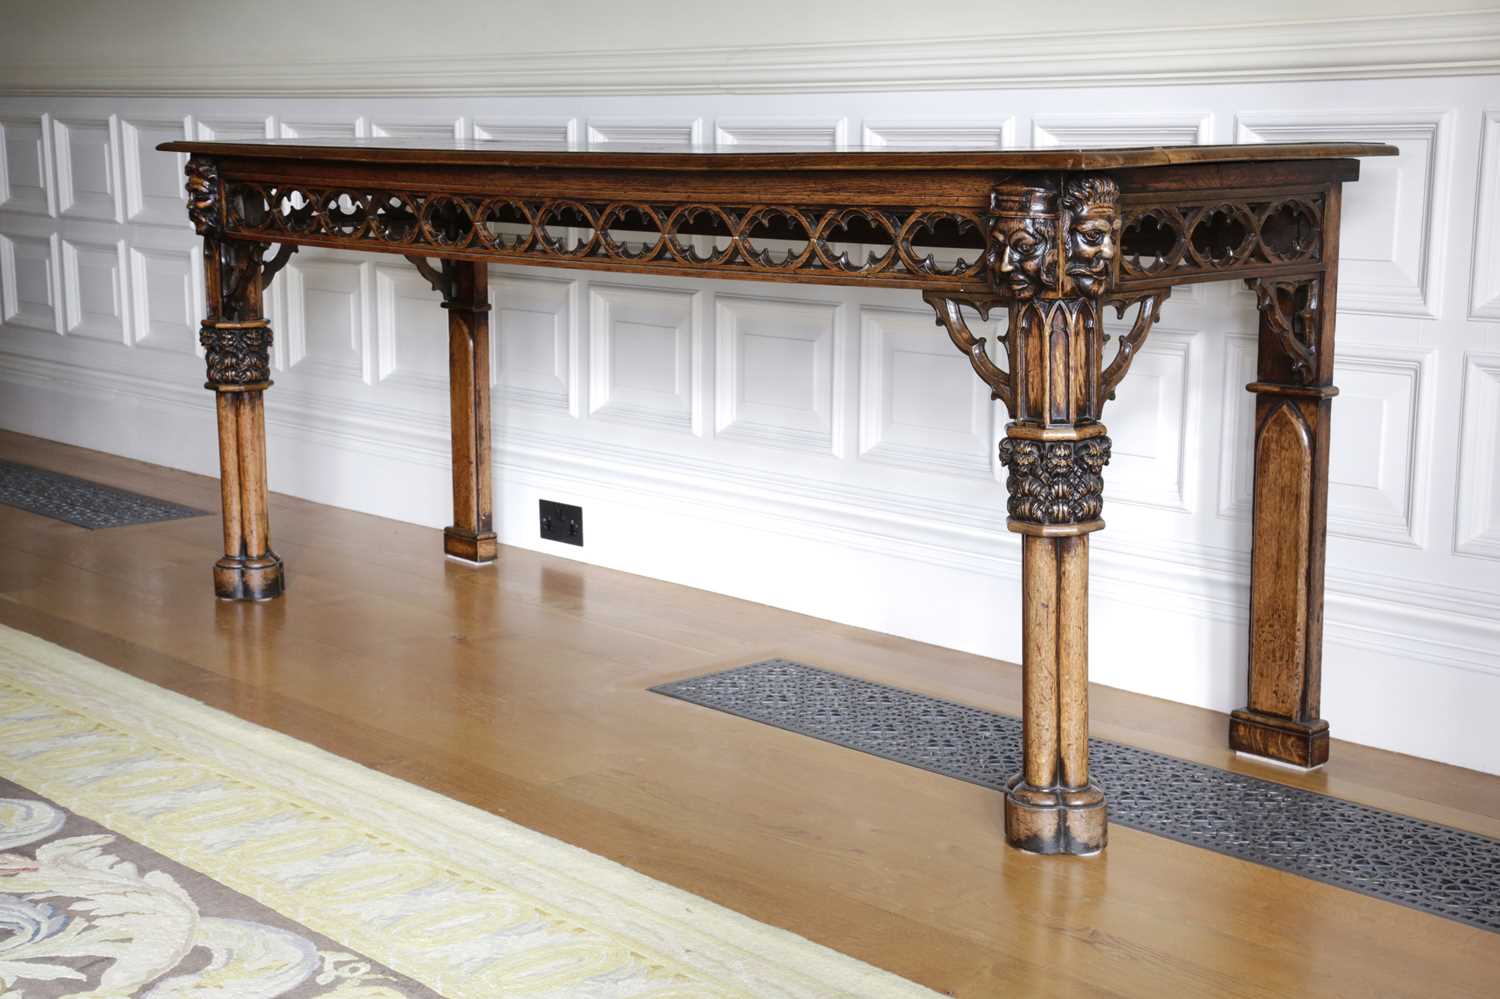 A FINE GEORGE IV OAK GOTHIC REVIVAL SERVING TABLE IN THE MANNER OF A.W.N. PUGIN, C.1830 the frieze